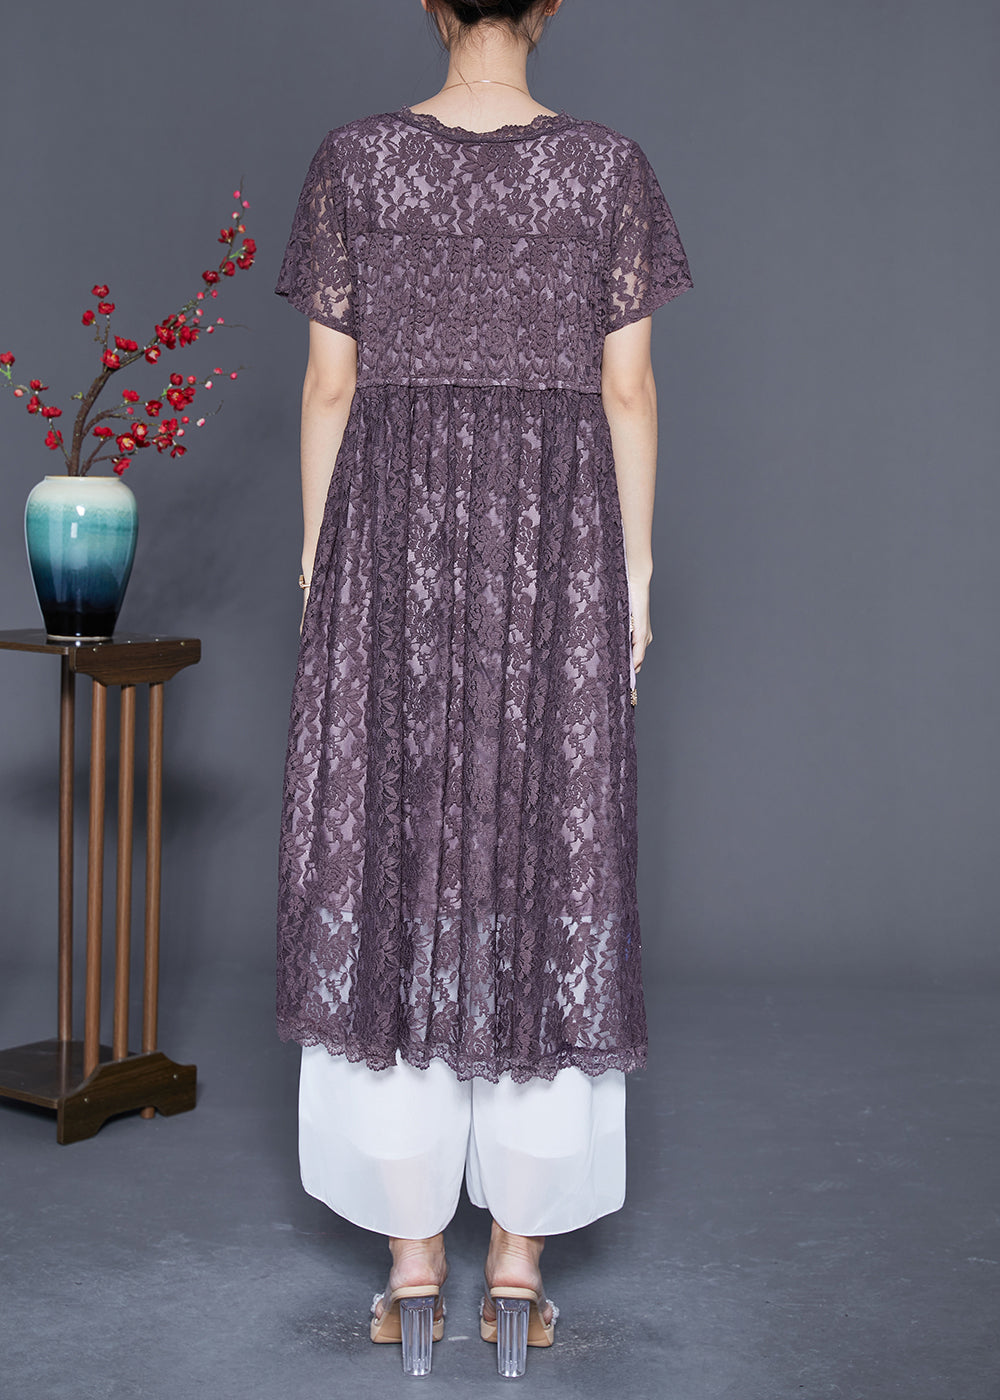 Slim Fit Grey Purple Cinched Hollow Out Lace Dress Summer